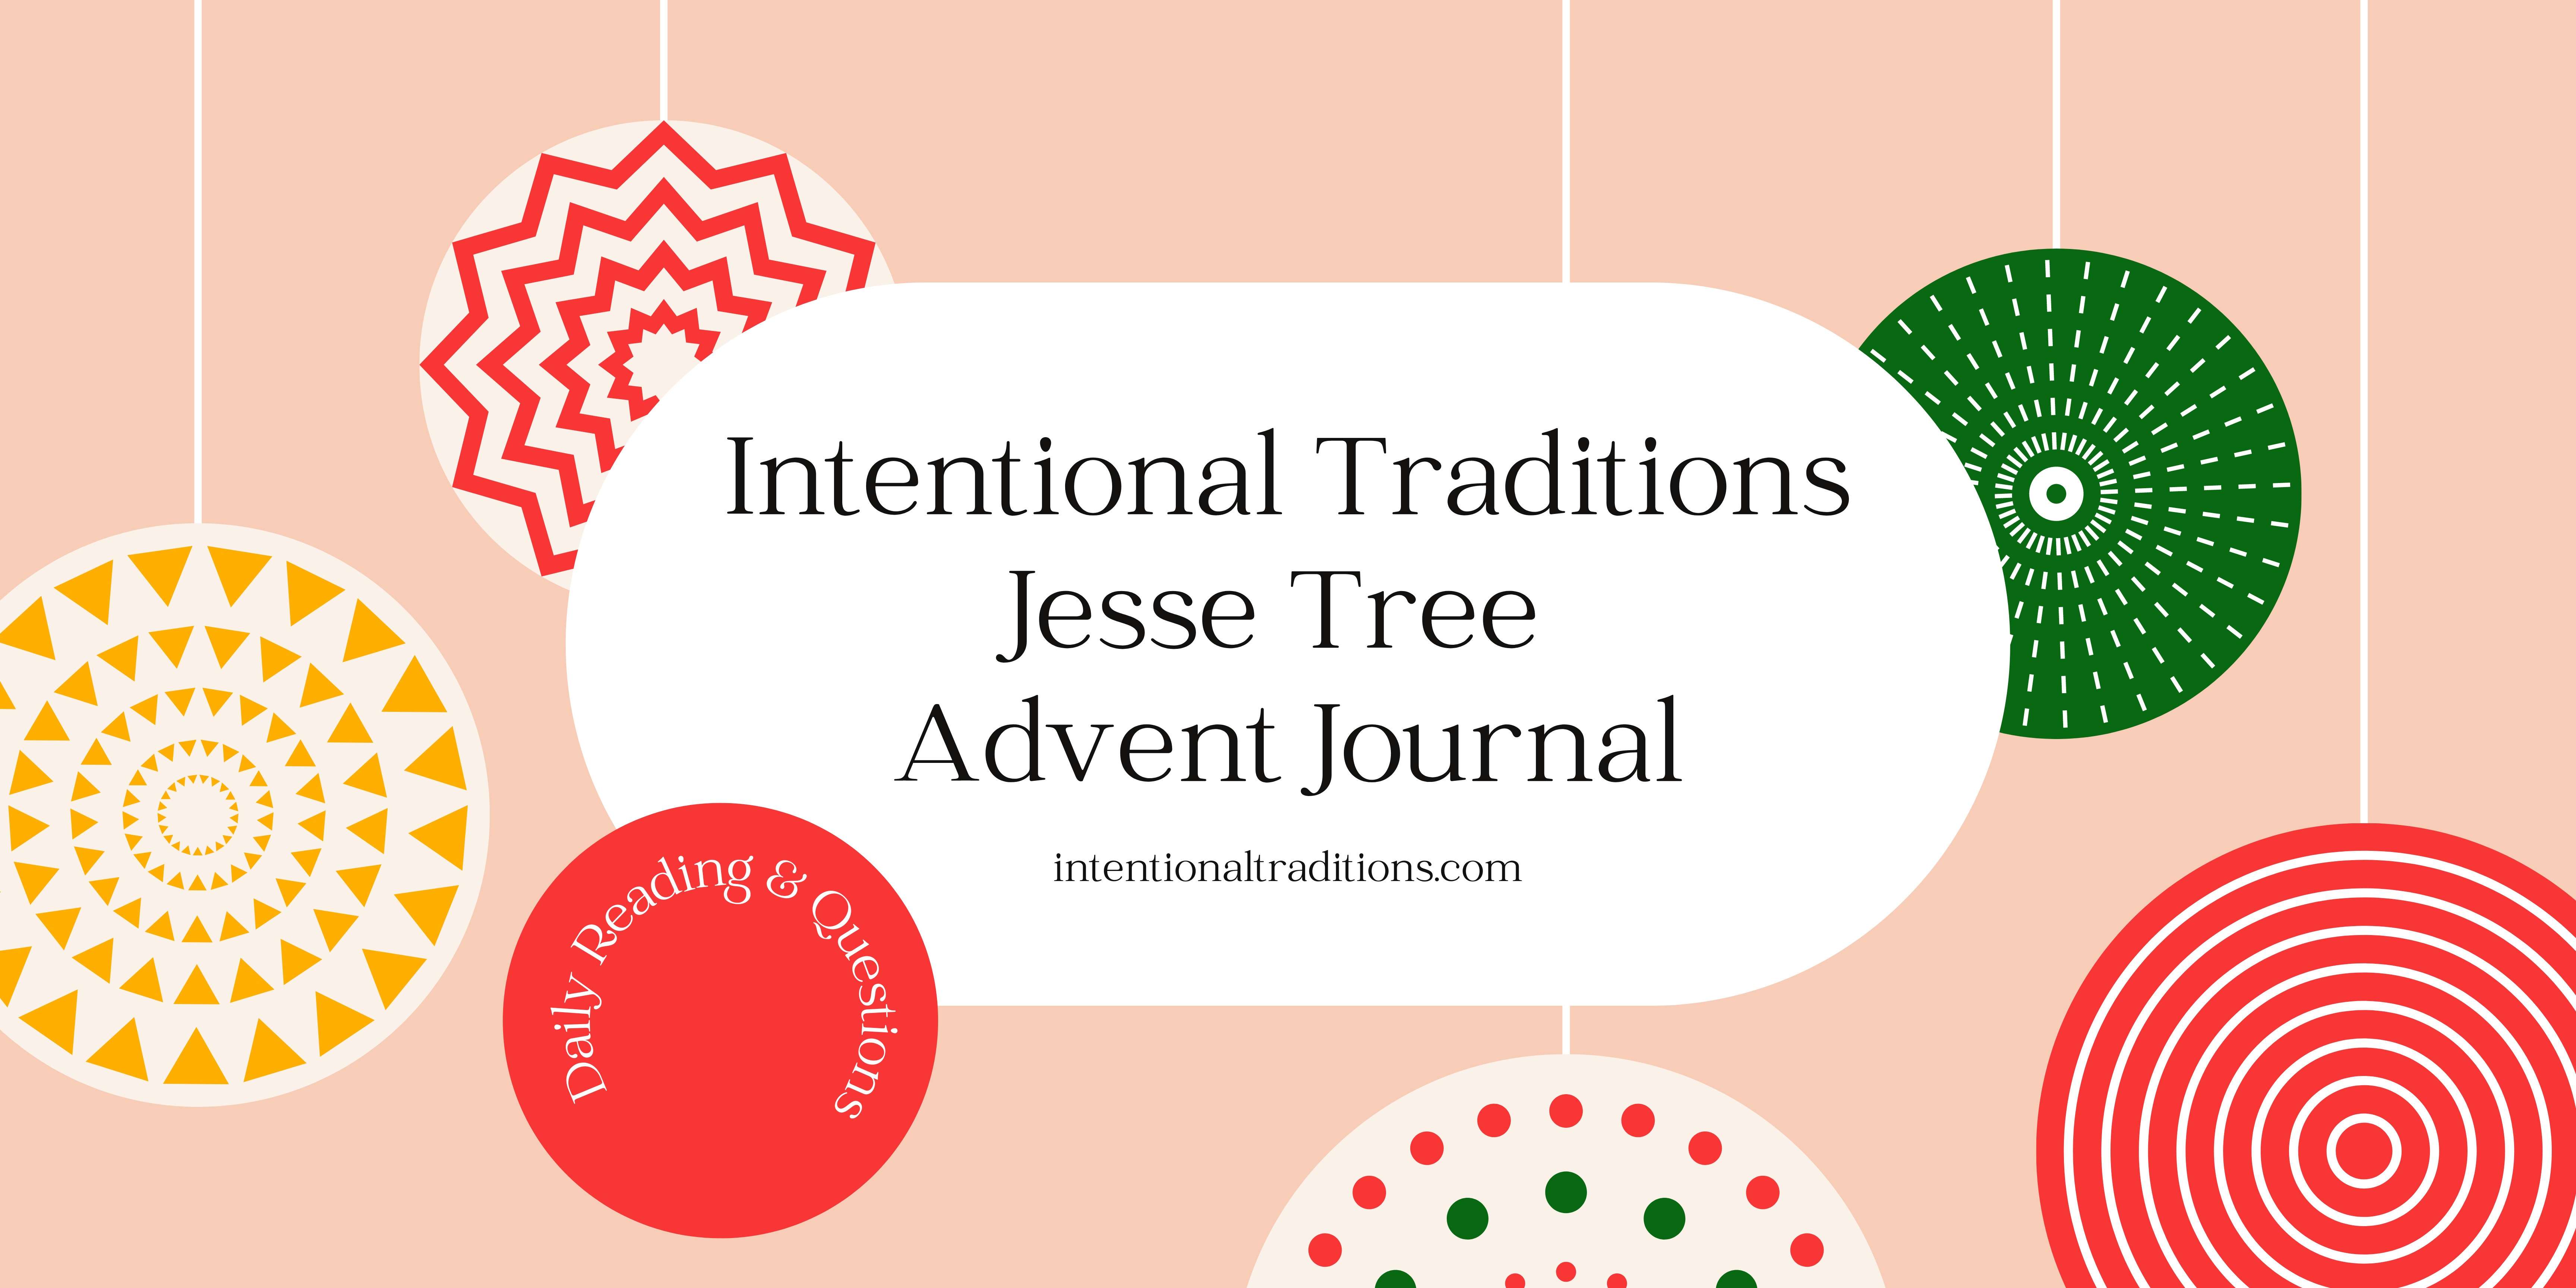 Intentional Traditions